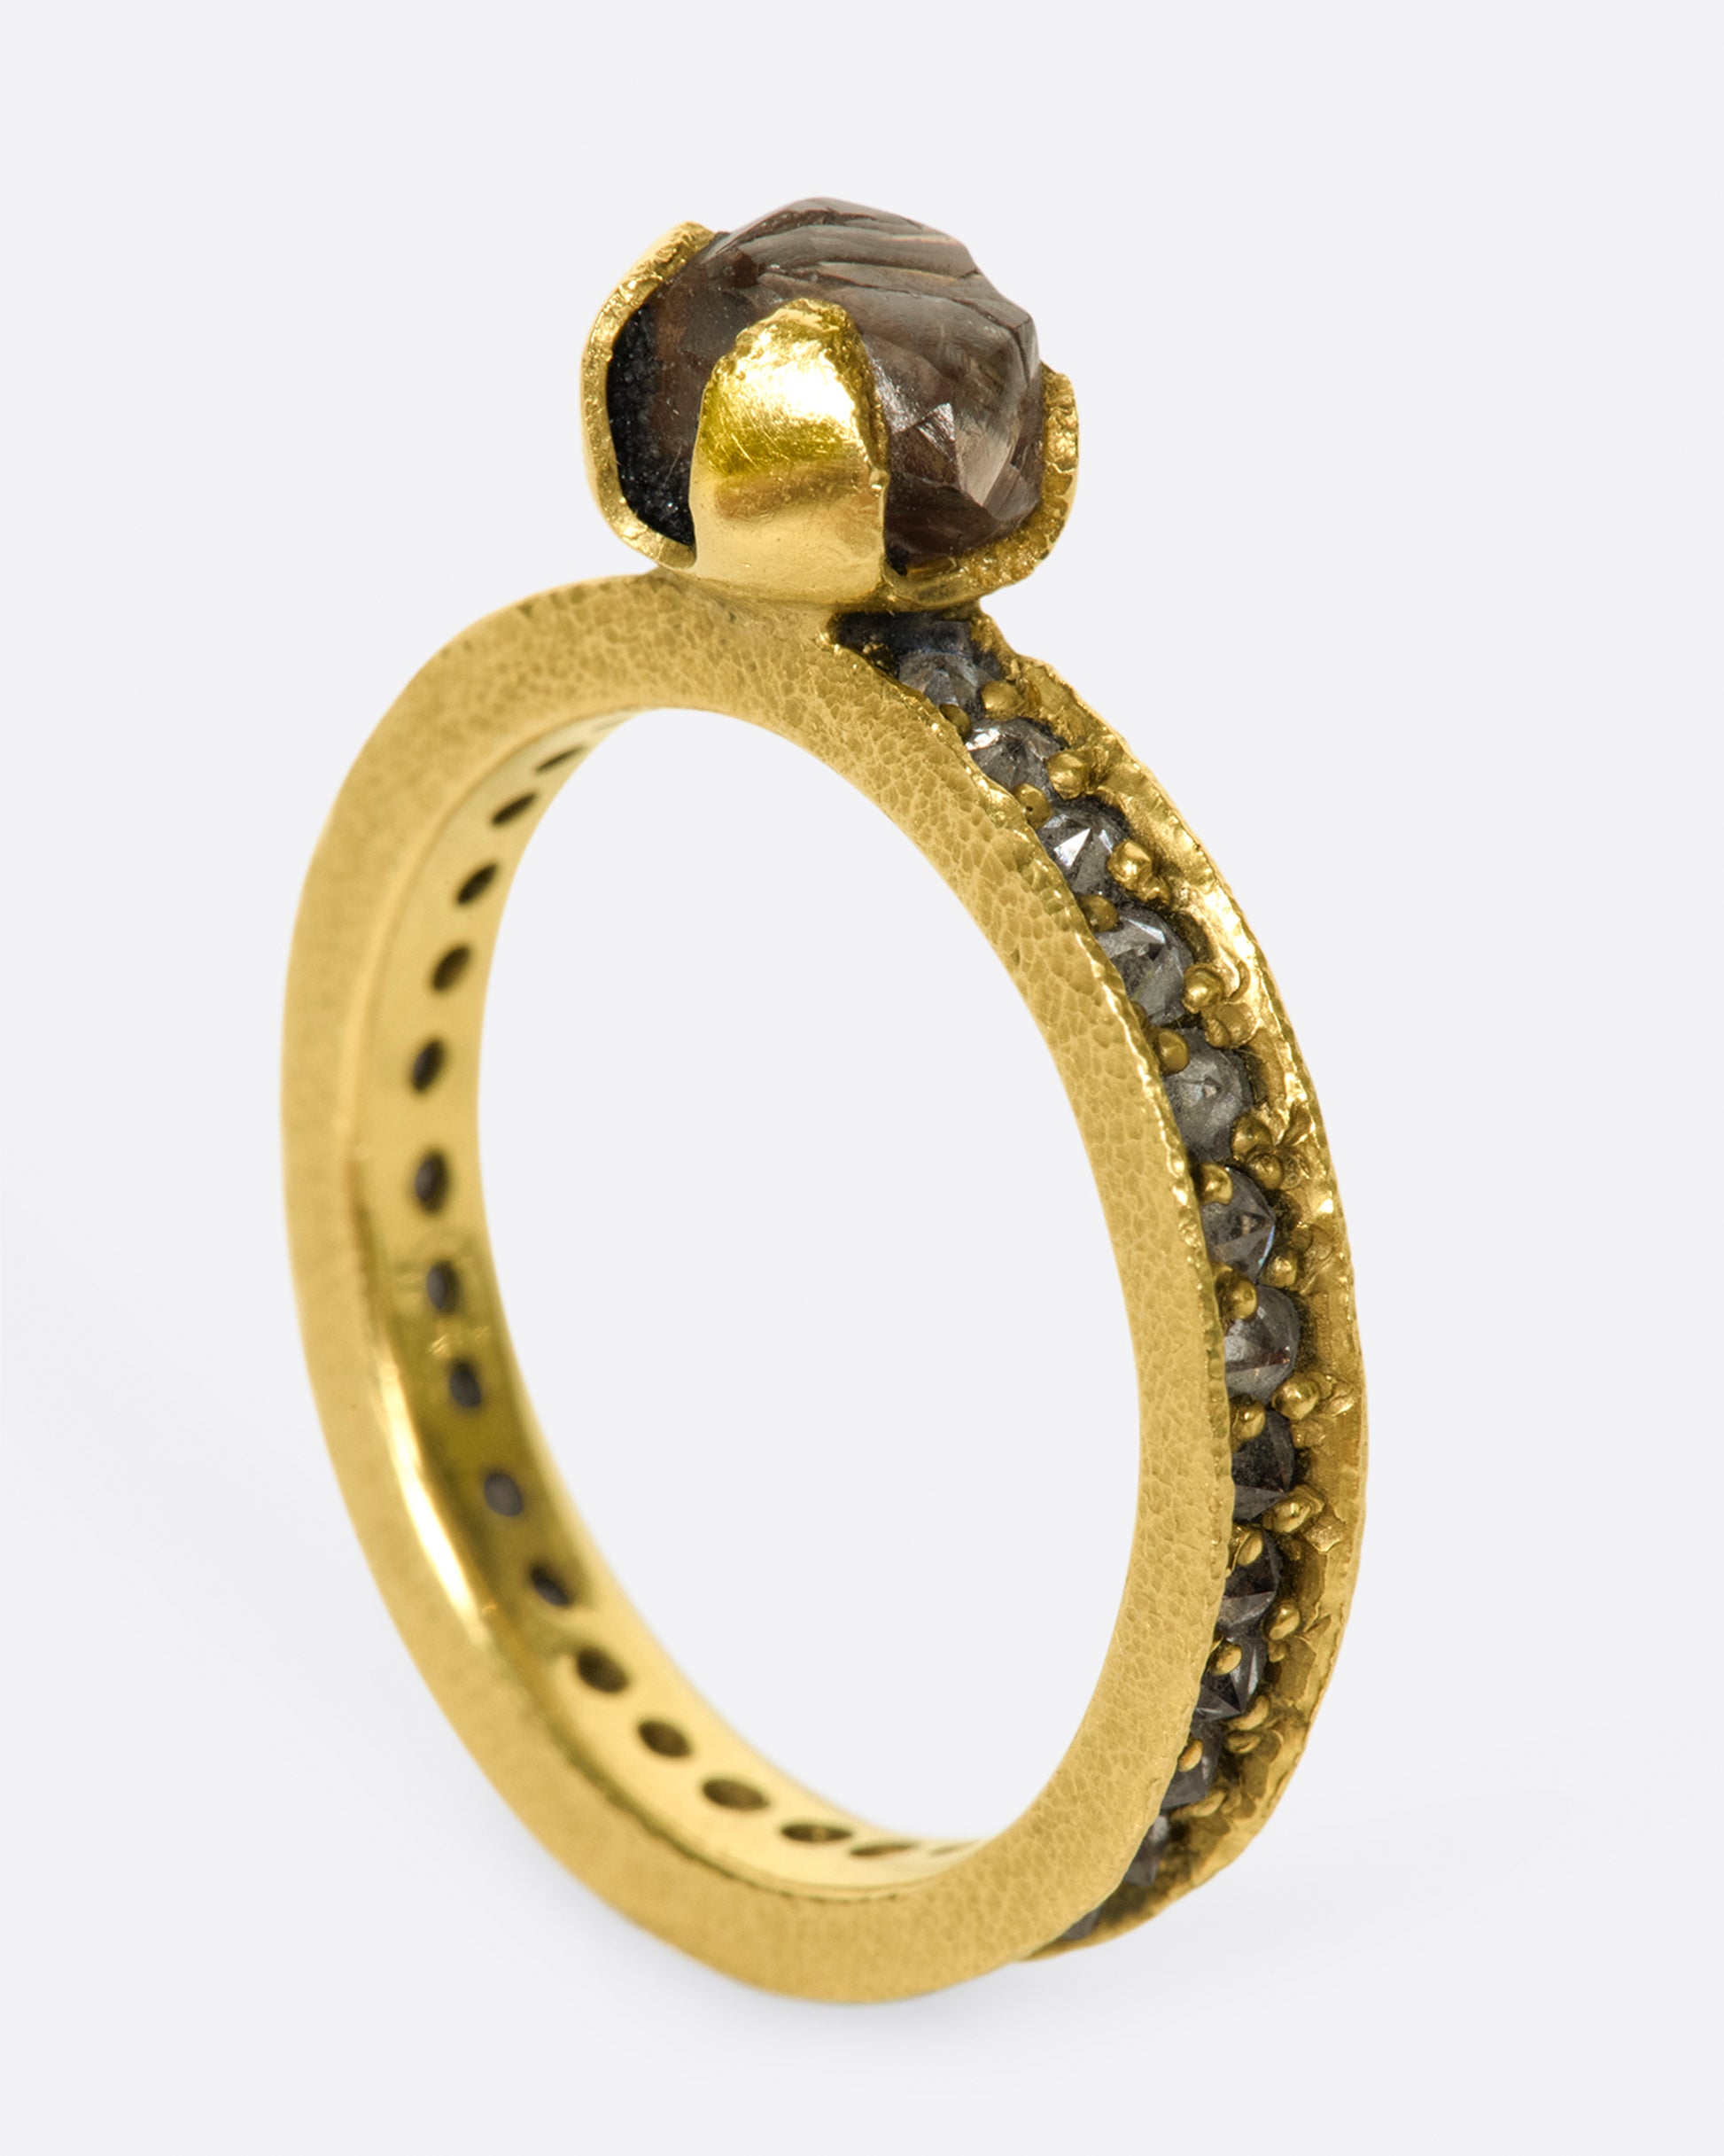 A yellow eternity band with inverted diamonds, crowned by a prong set raw yellow diamond.